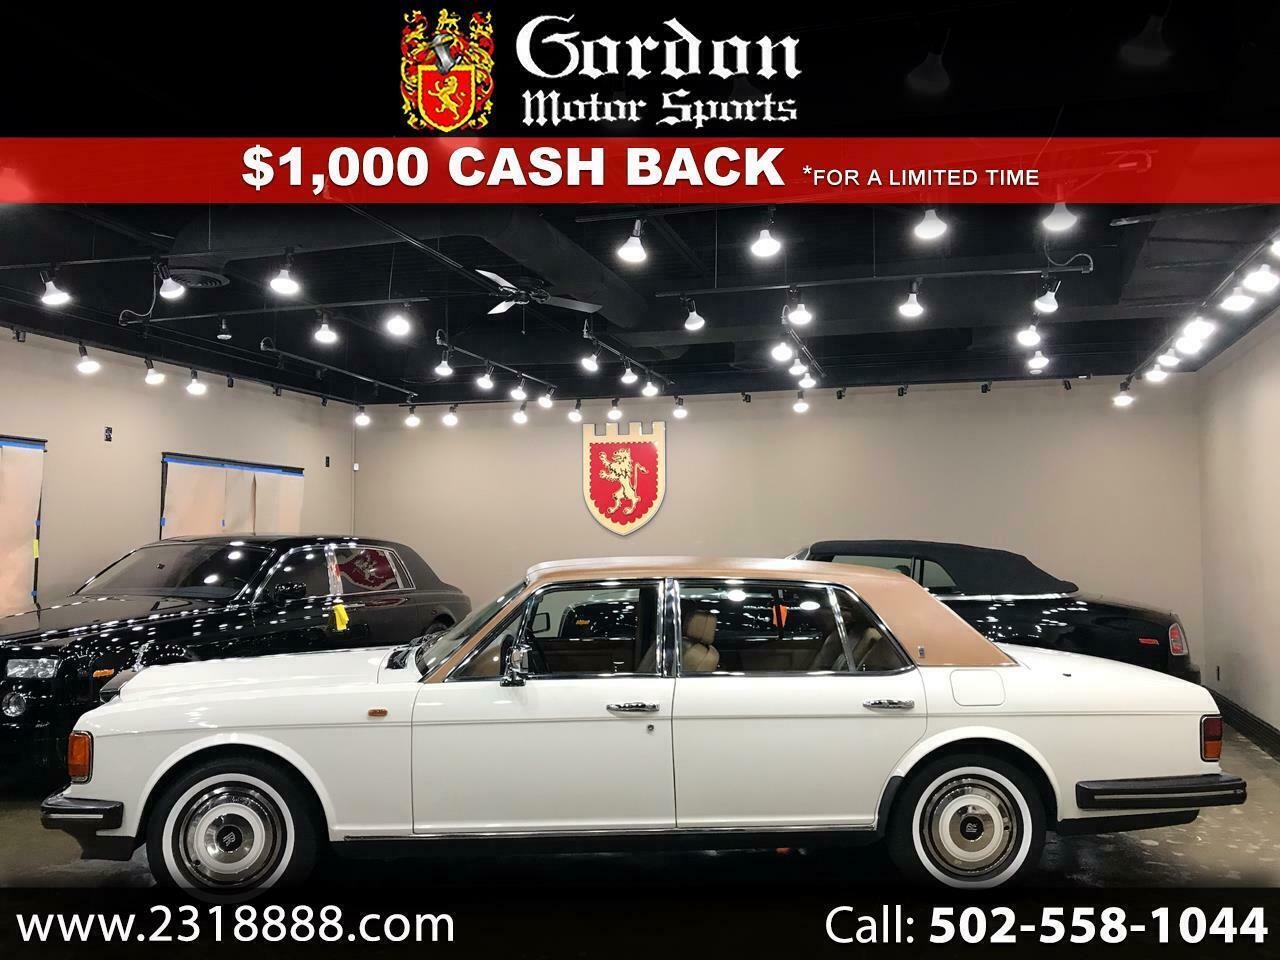 1989 Rolls-royce Silver Spirit/spur/dawn  1989 Rolls-royce Silver Spur, White With 60764 Miles Available Now!